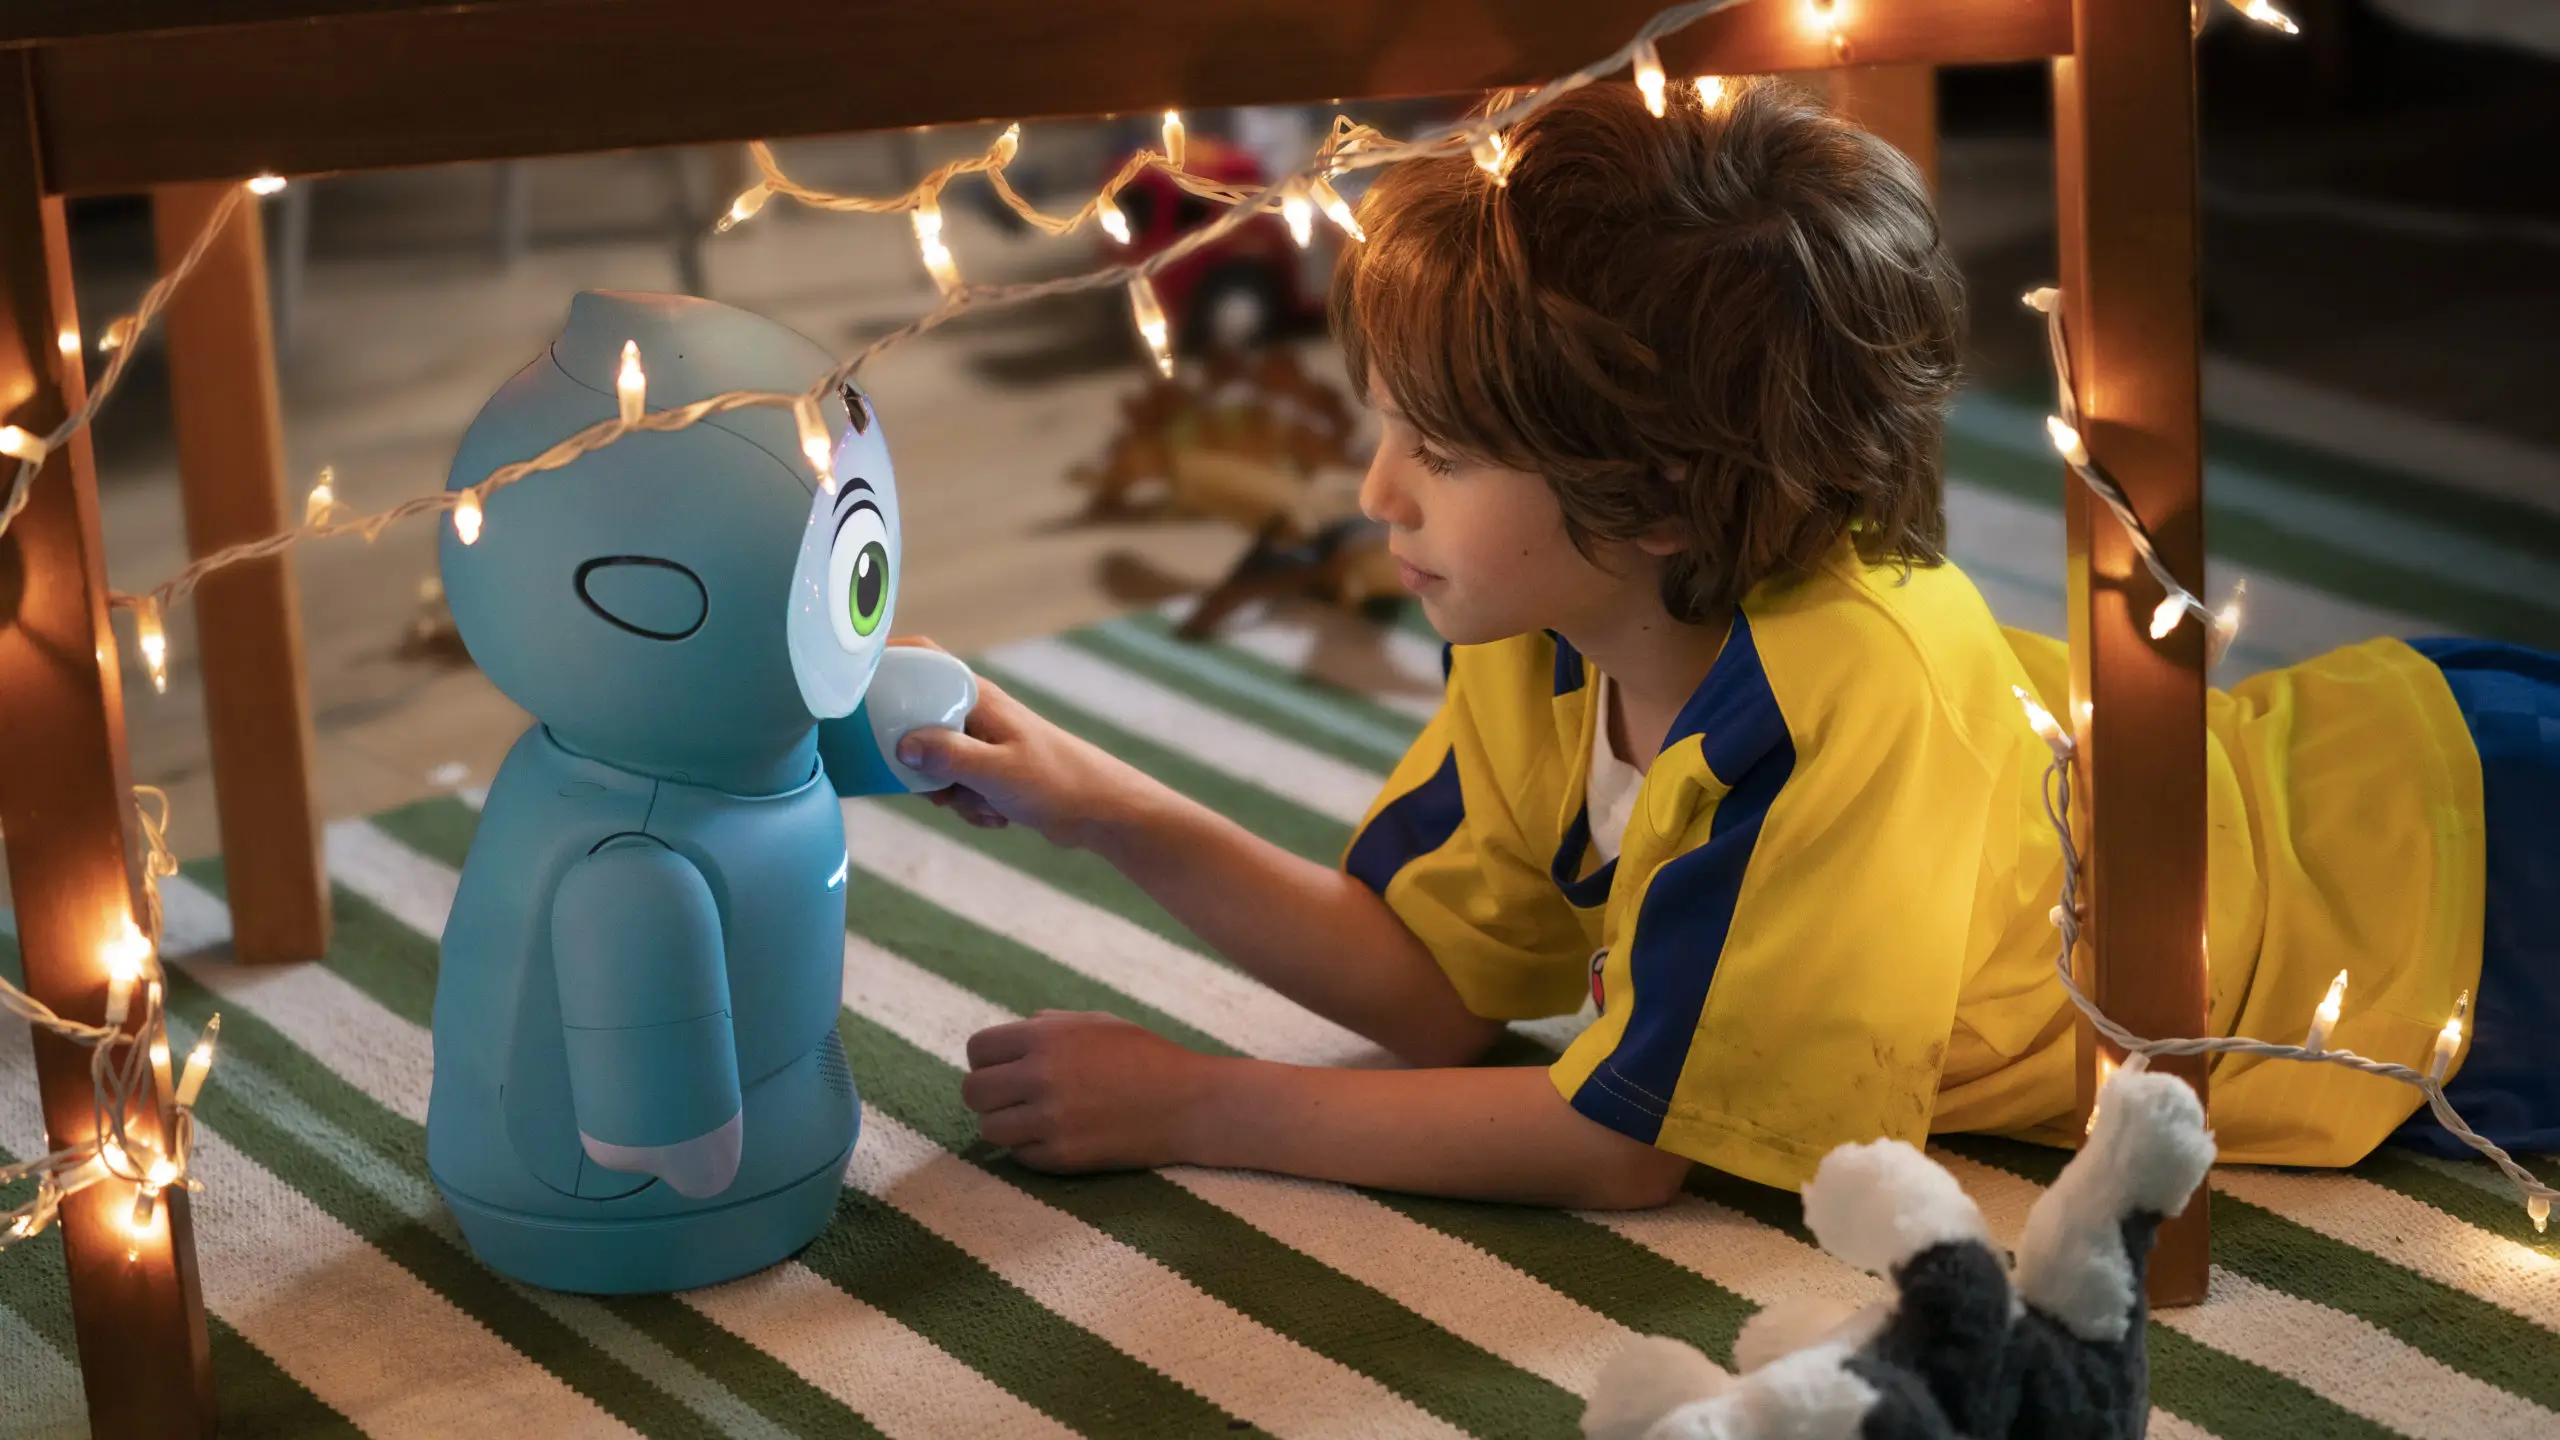 Embodied's Moxie robot helps children ages 5-10 build social-emotional skills